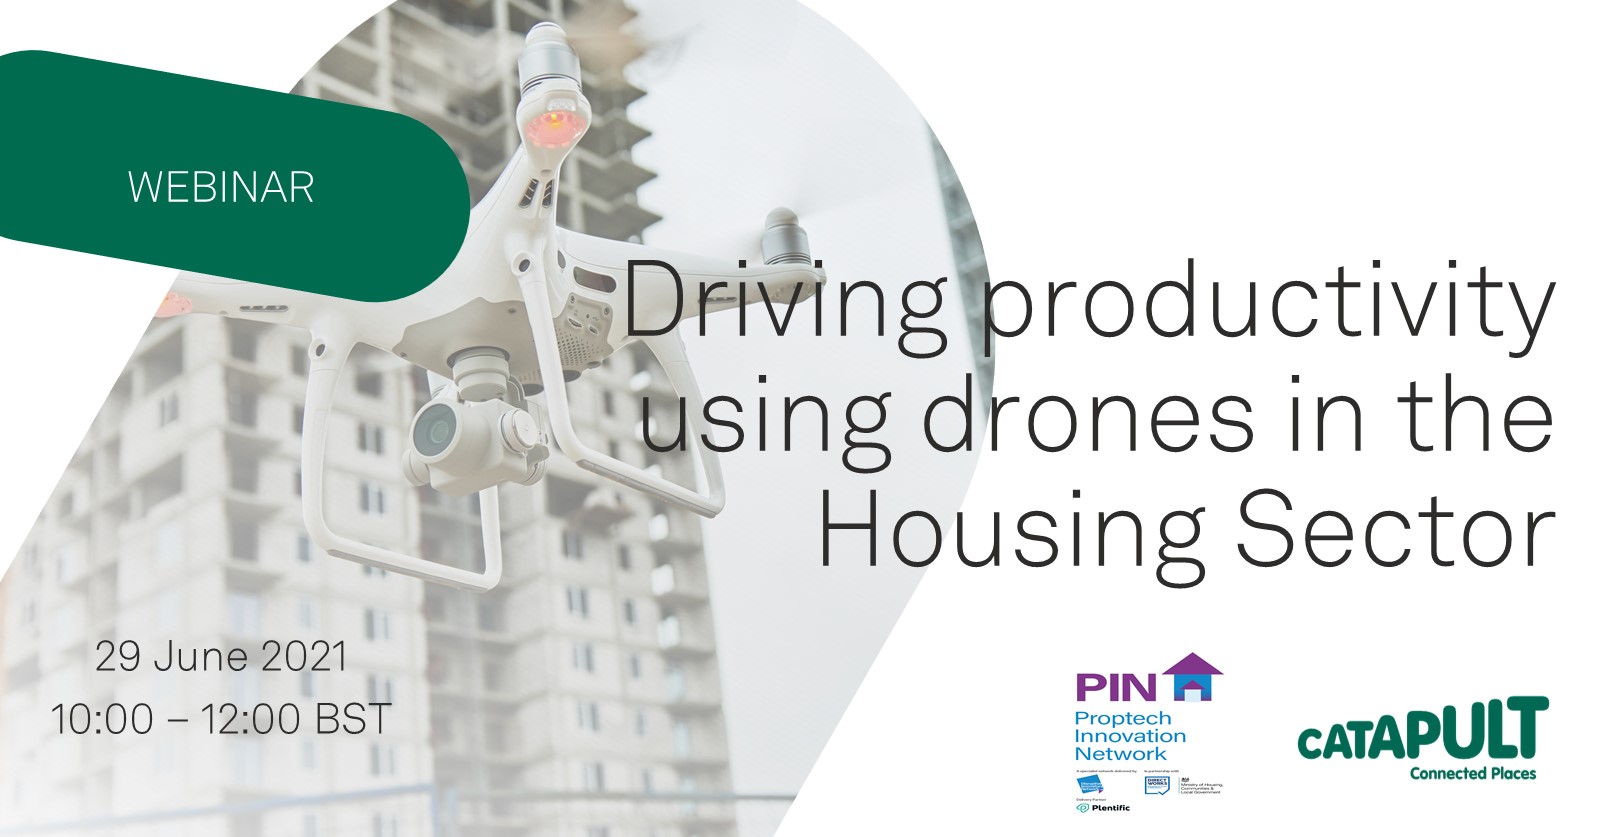 How can drone technology improve asset management in housing?